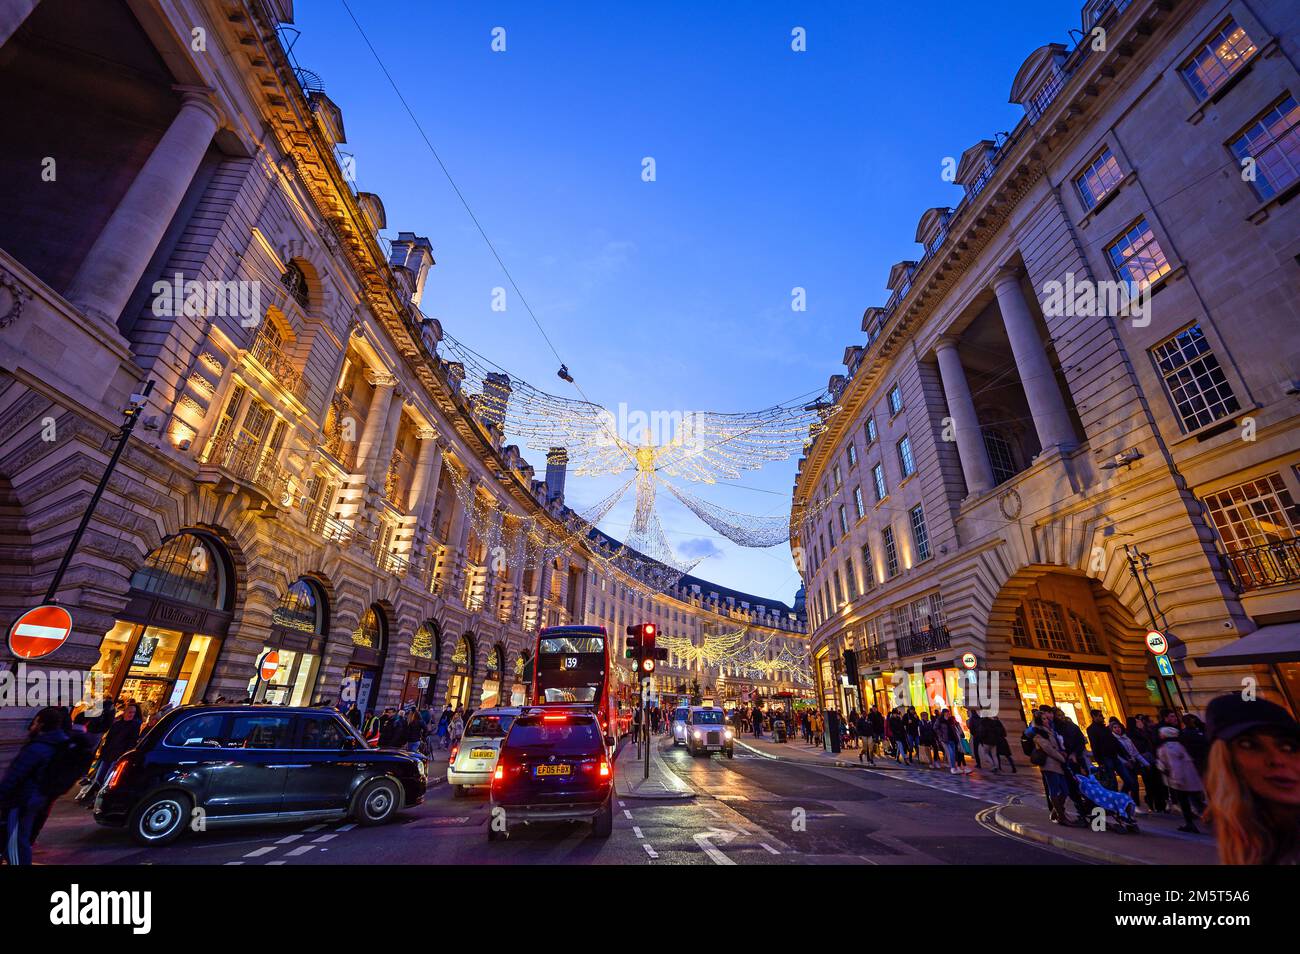 People and traffic along Regent Street in London, UK. Evening view of Regent Street with Christmas lights above the road Stock Photo